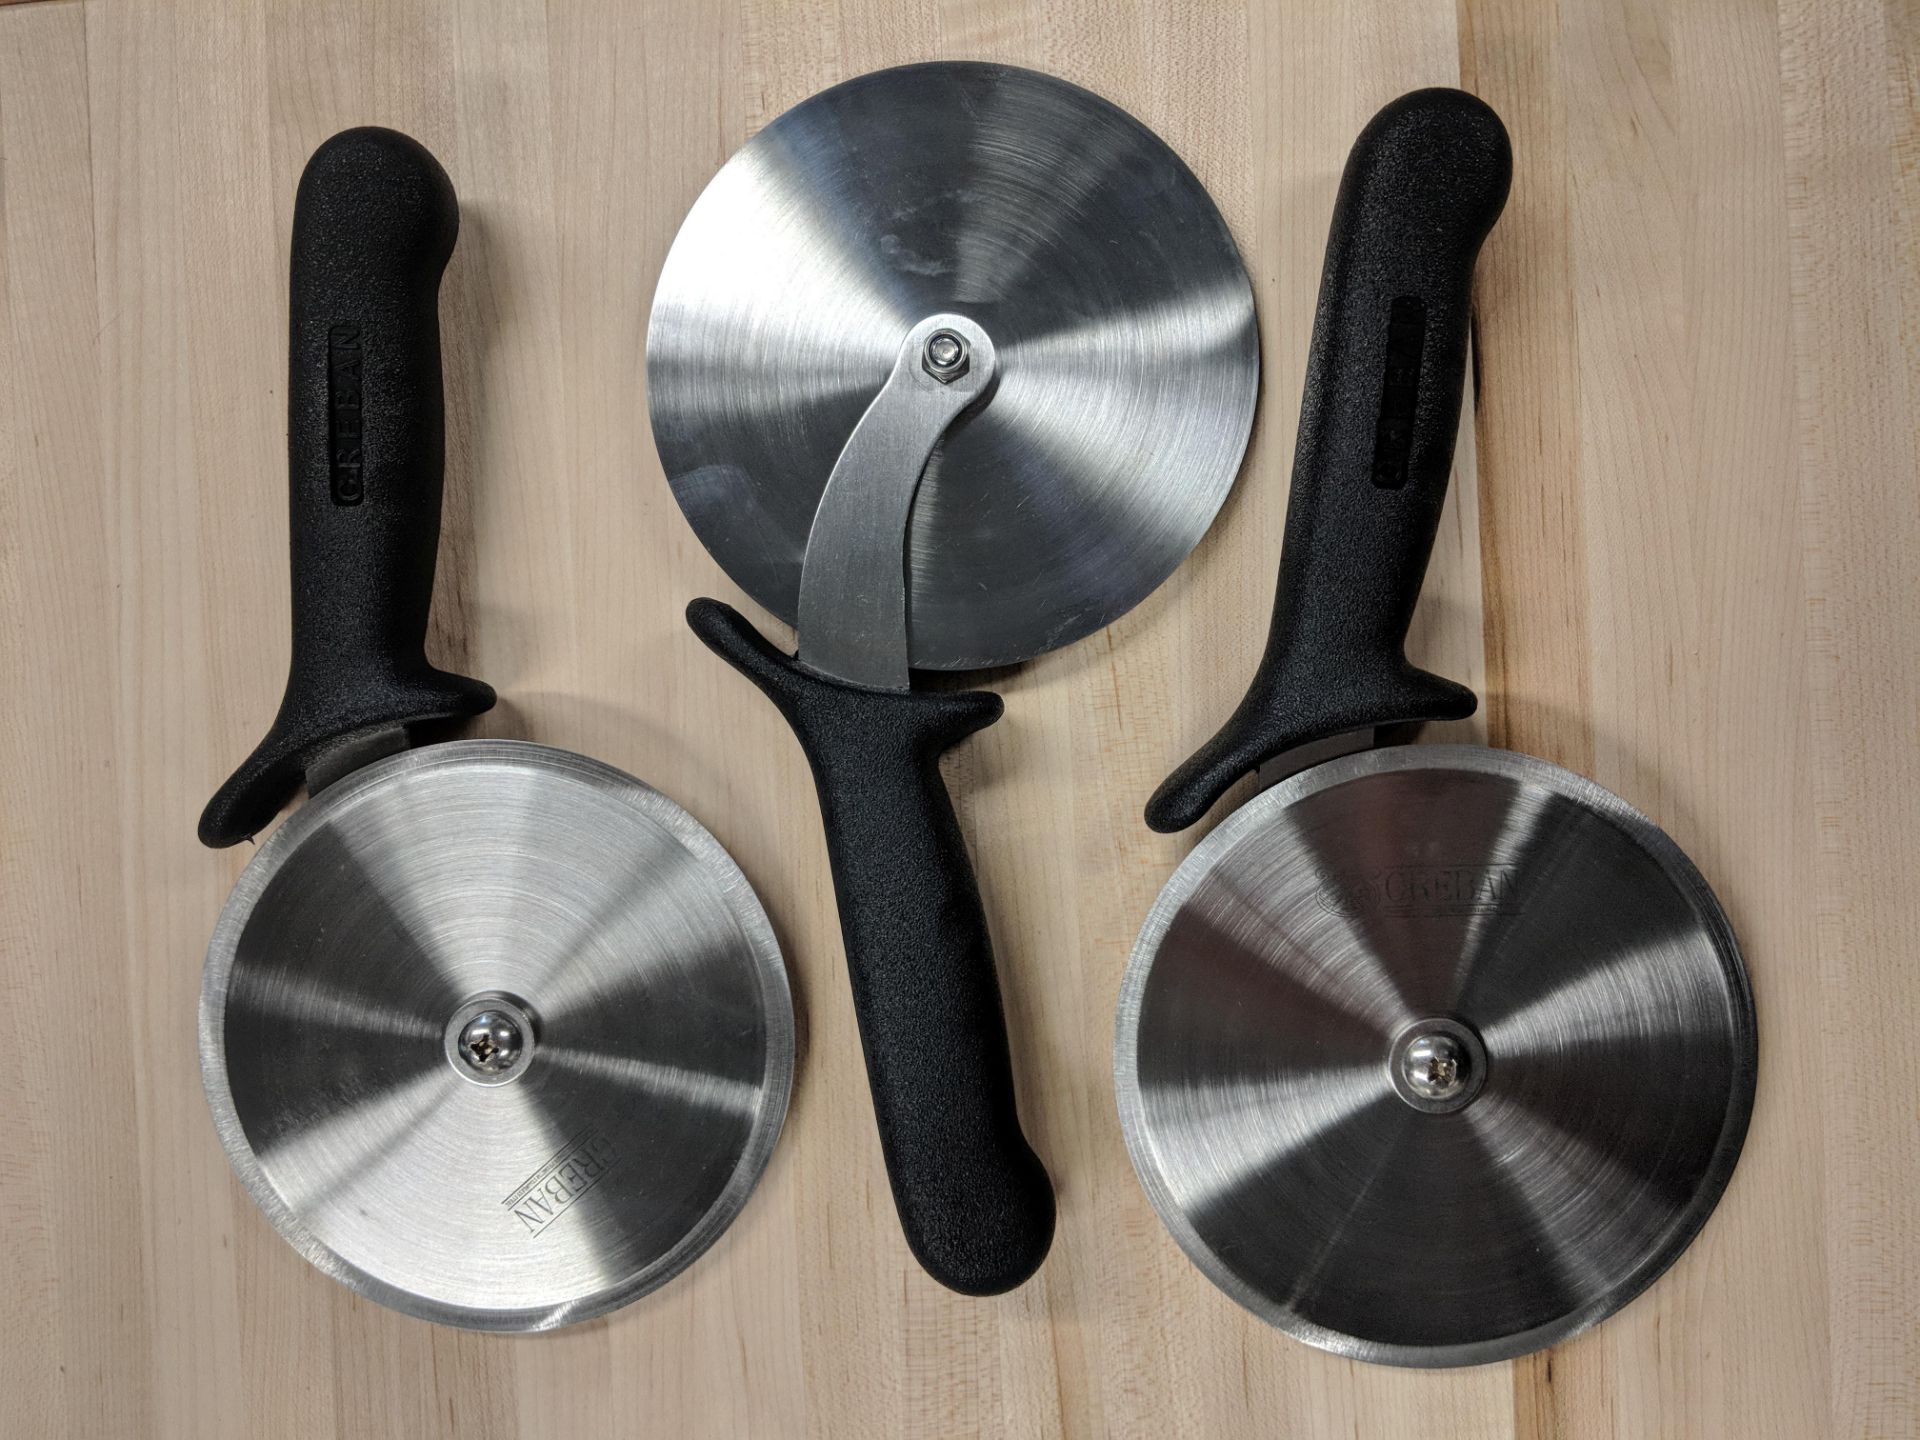 5” R-Style Pizza Cutters w/Black Handle - Lot of 3 - Image 7 of 7